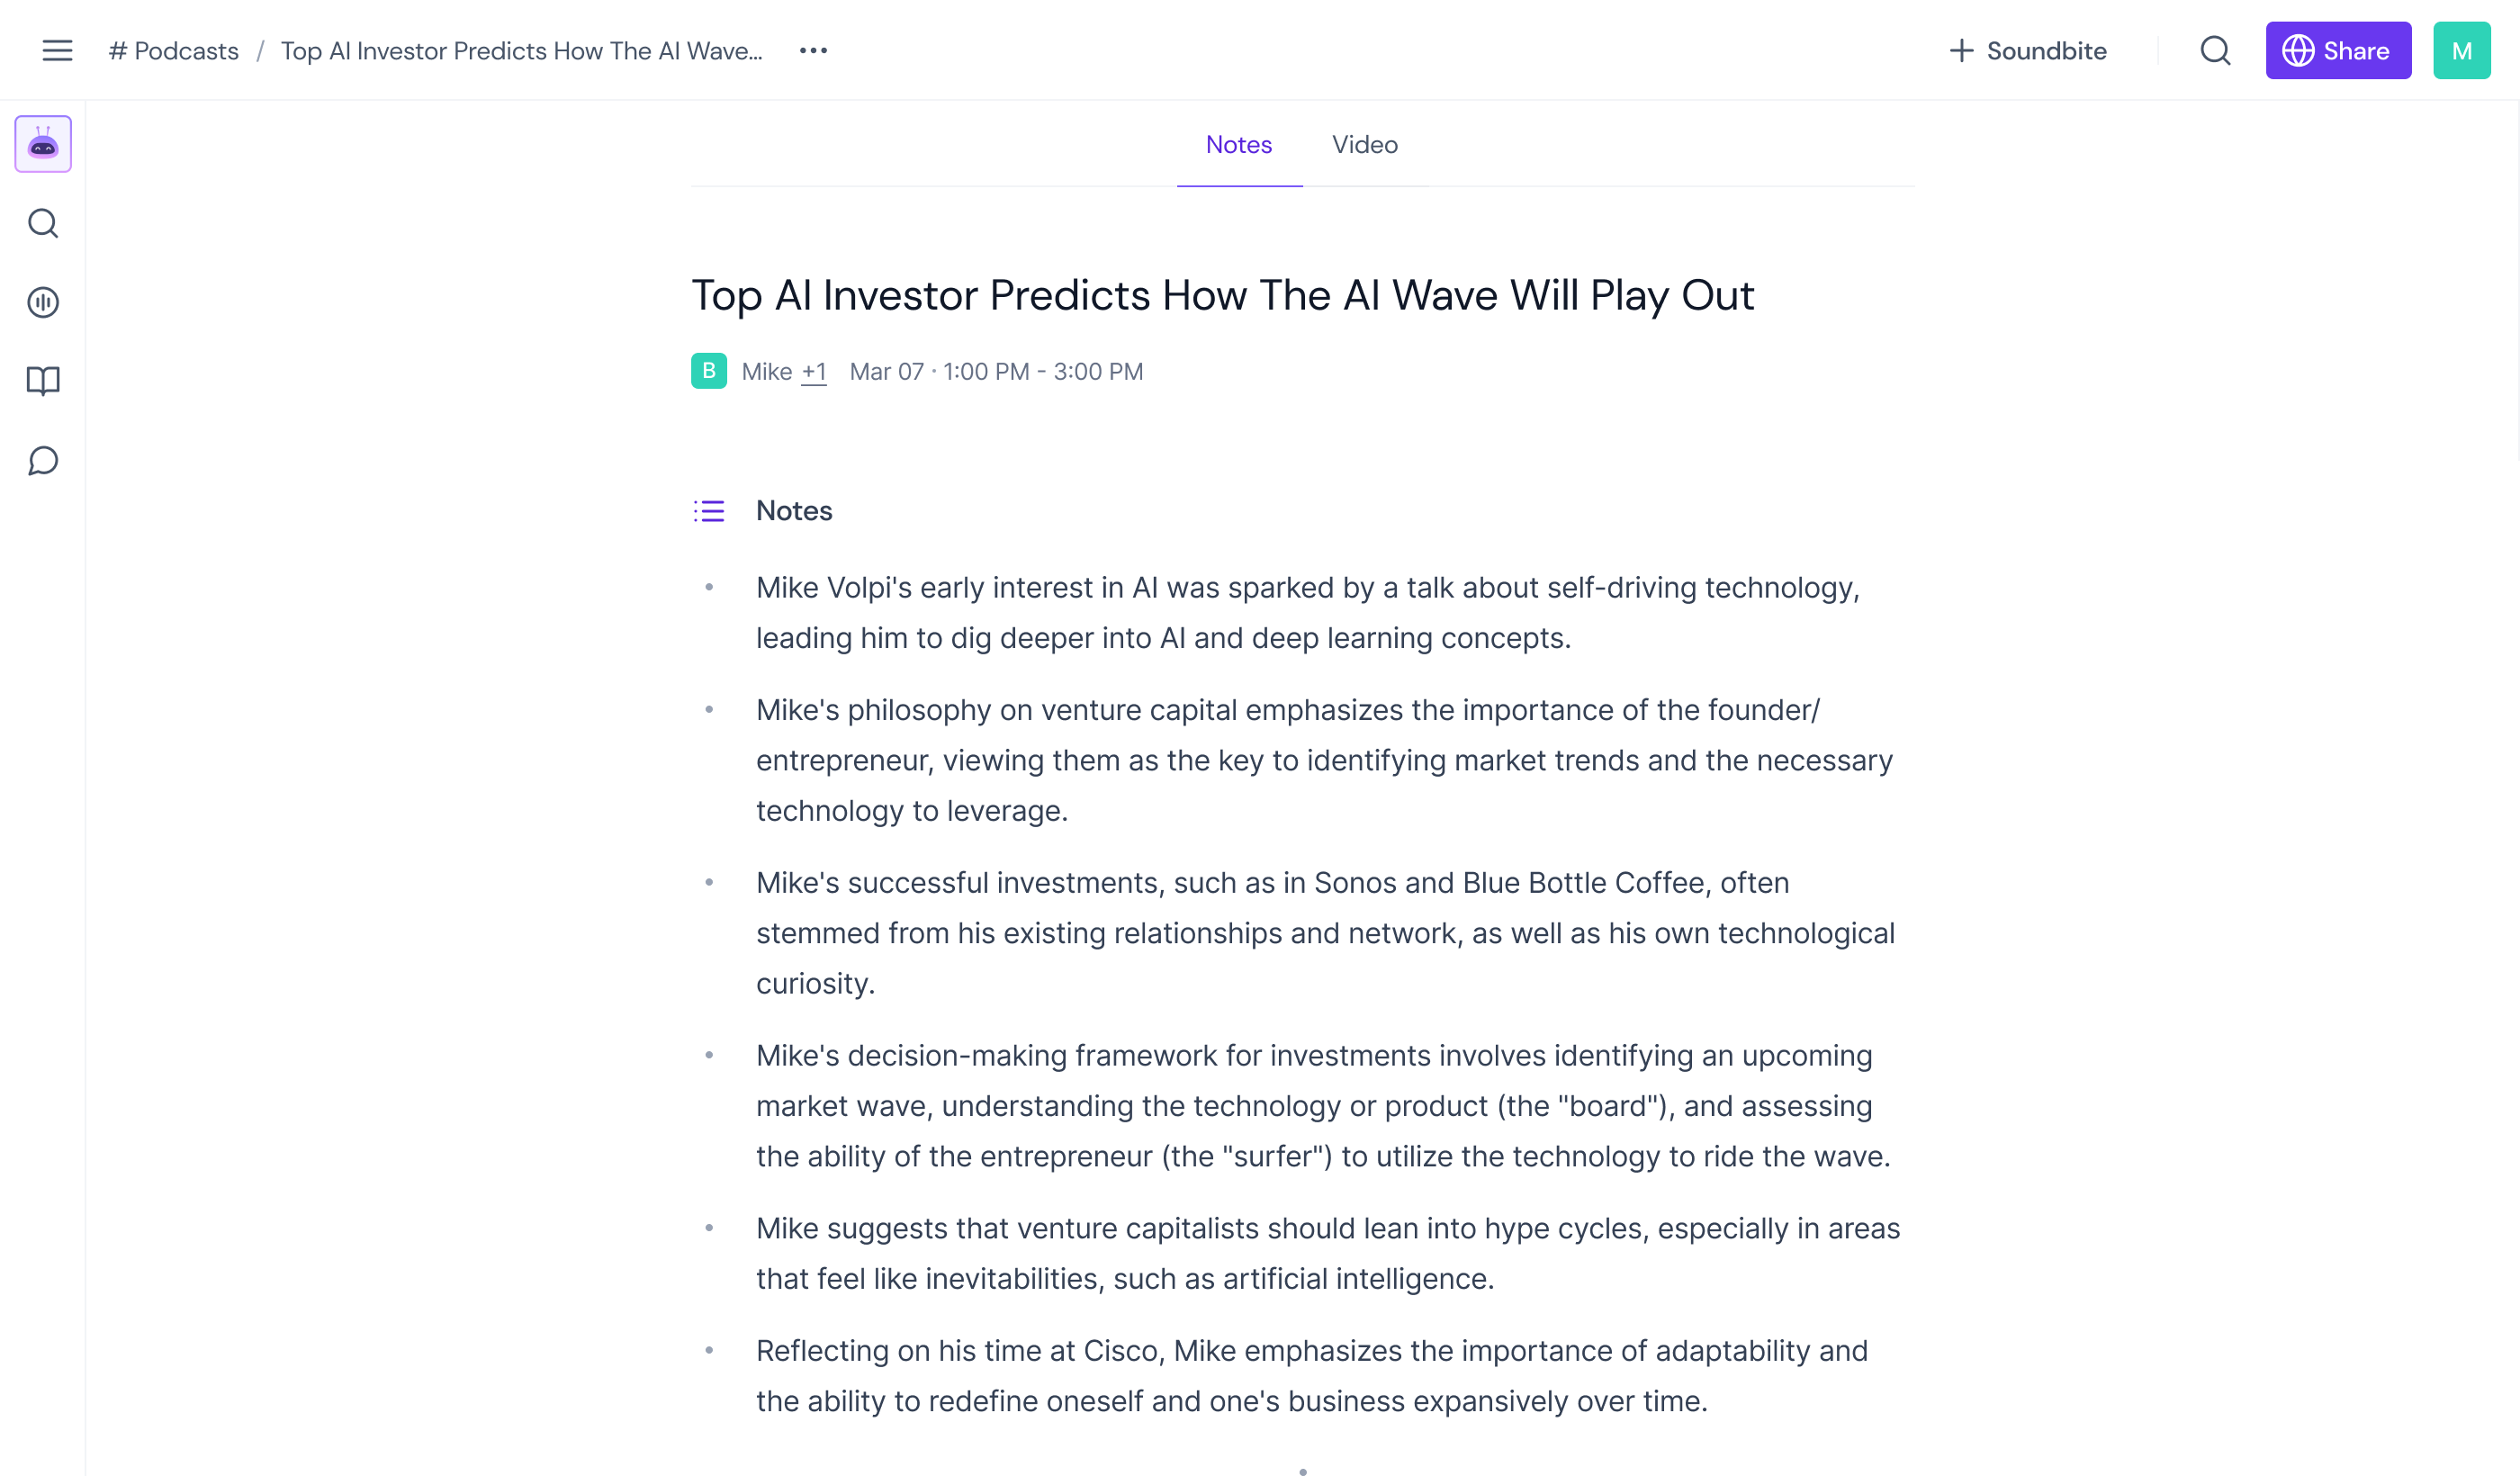 The Logan Bartlett Show: Top AI investor predicts how AI wave will play out—Summary powered by Fireflies.ai